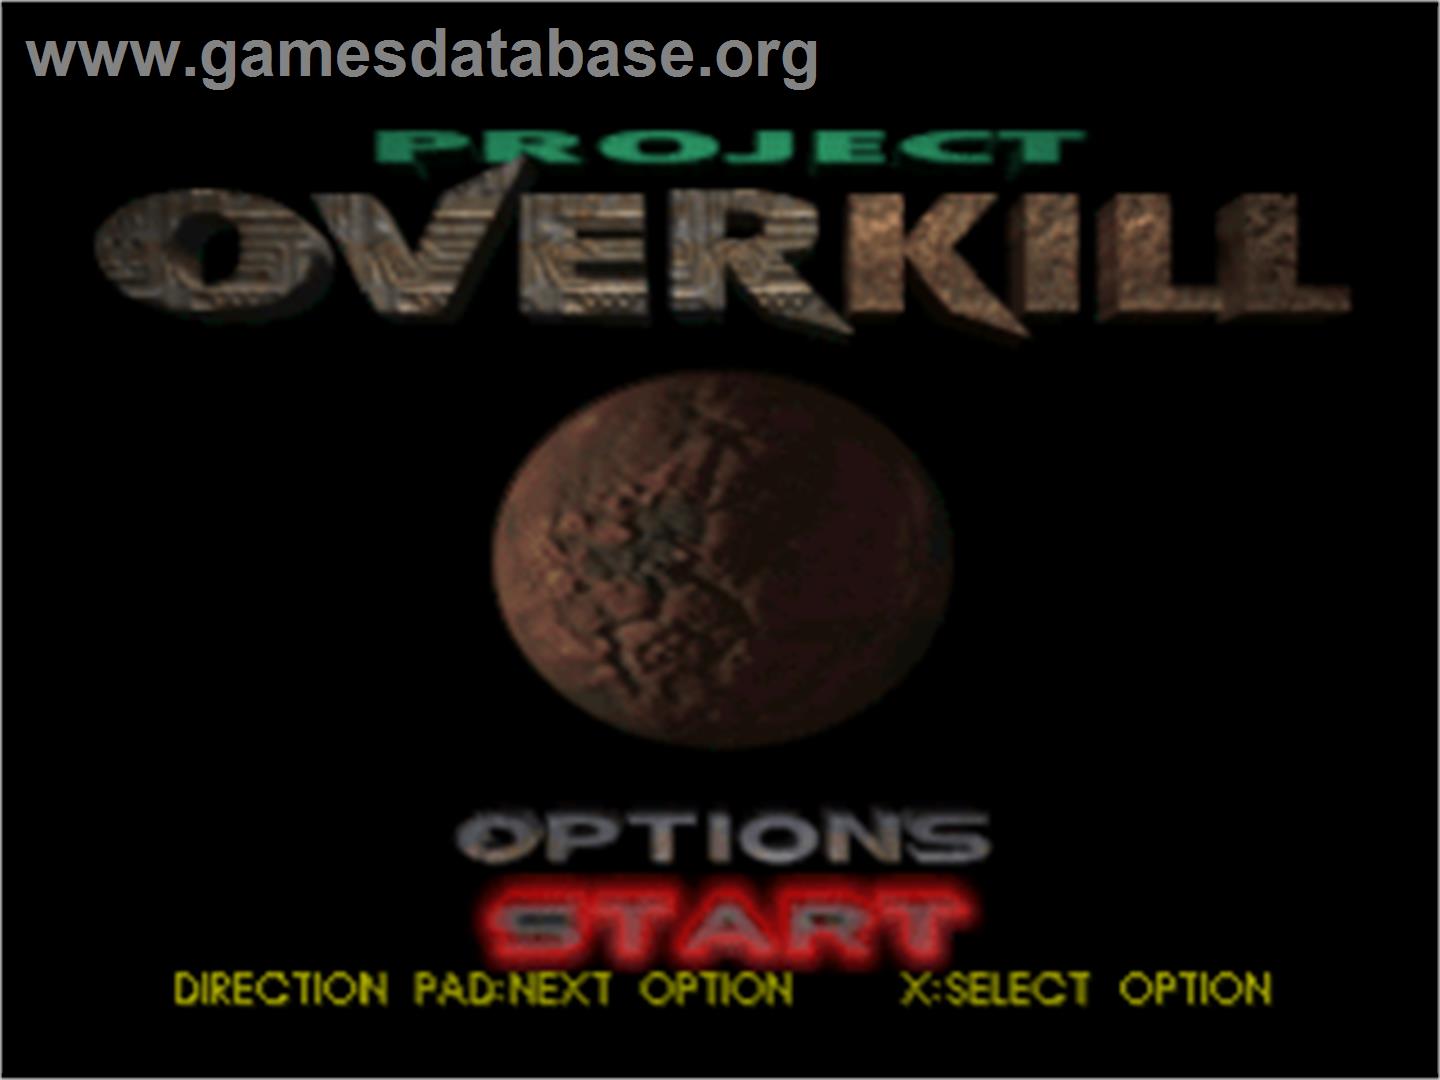 Project Overkill - Sony Playstation - Artwork - Title Screen